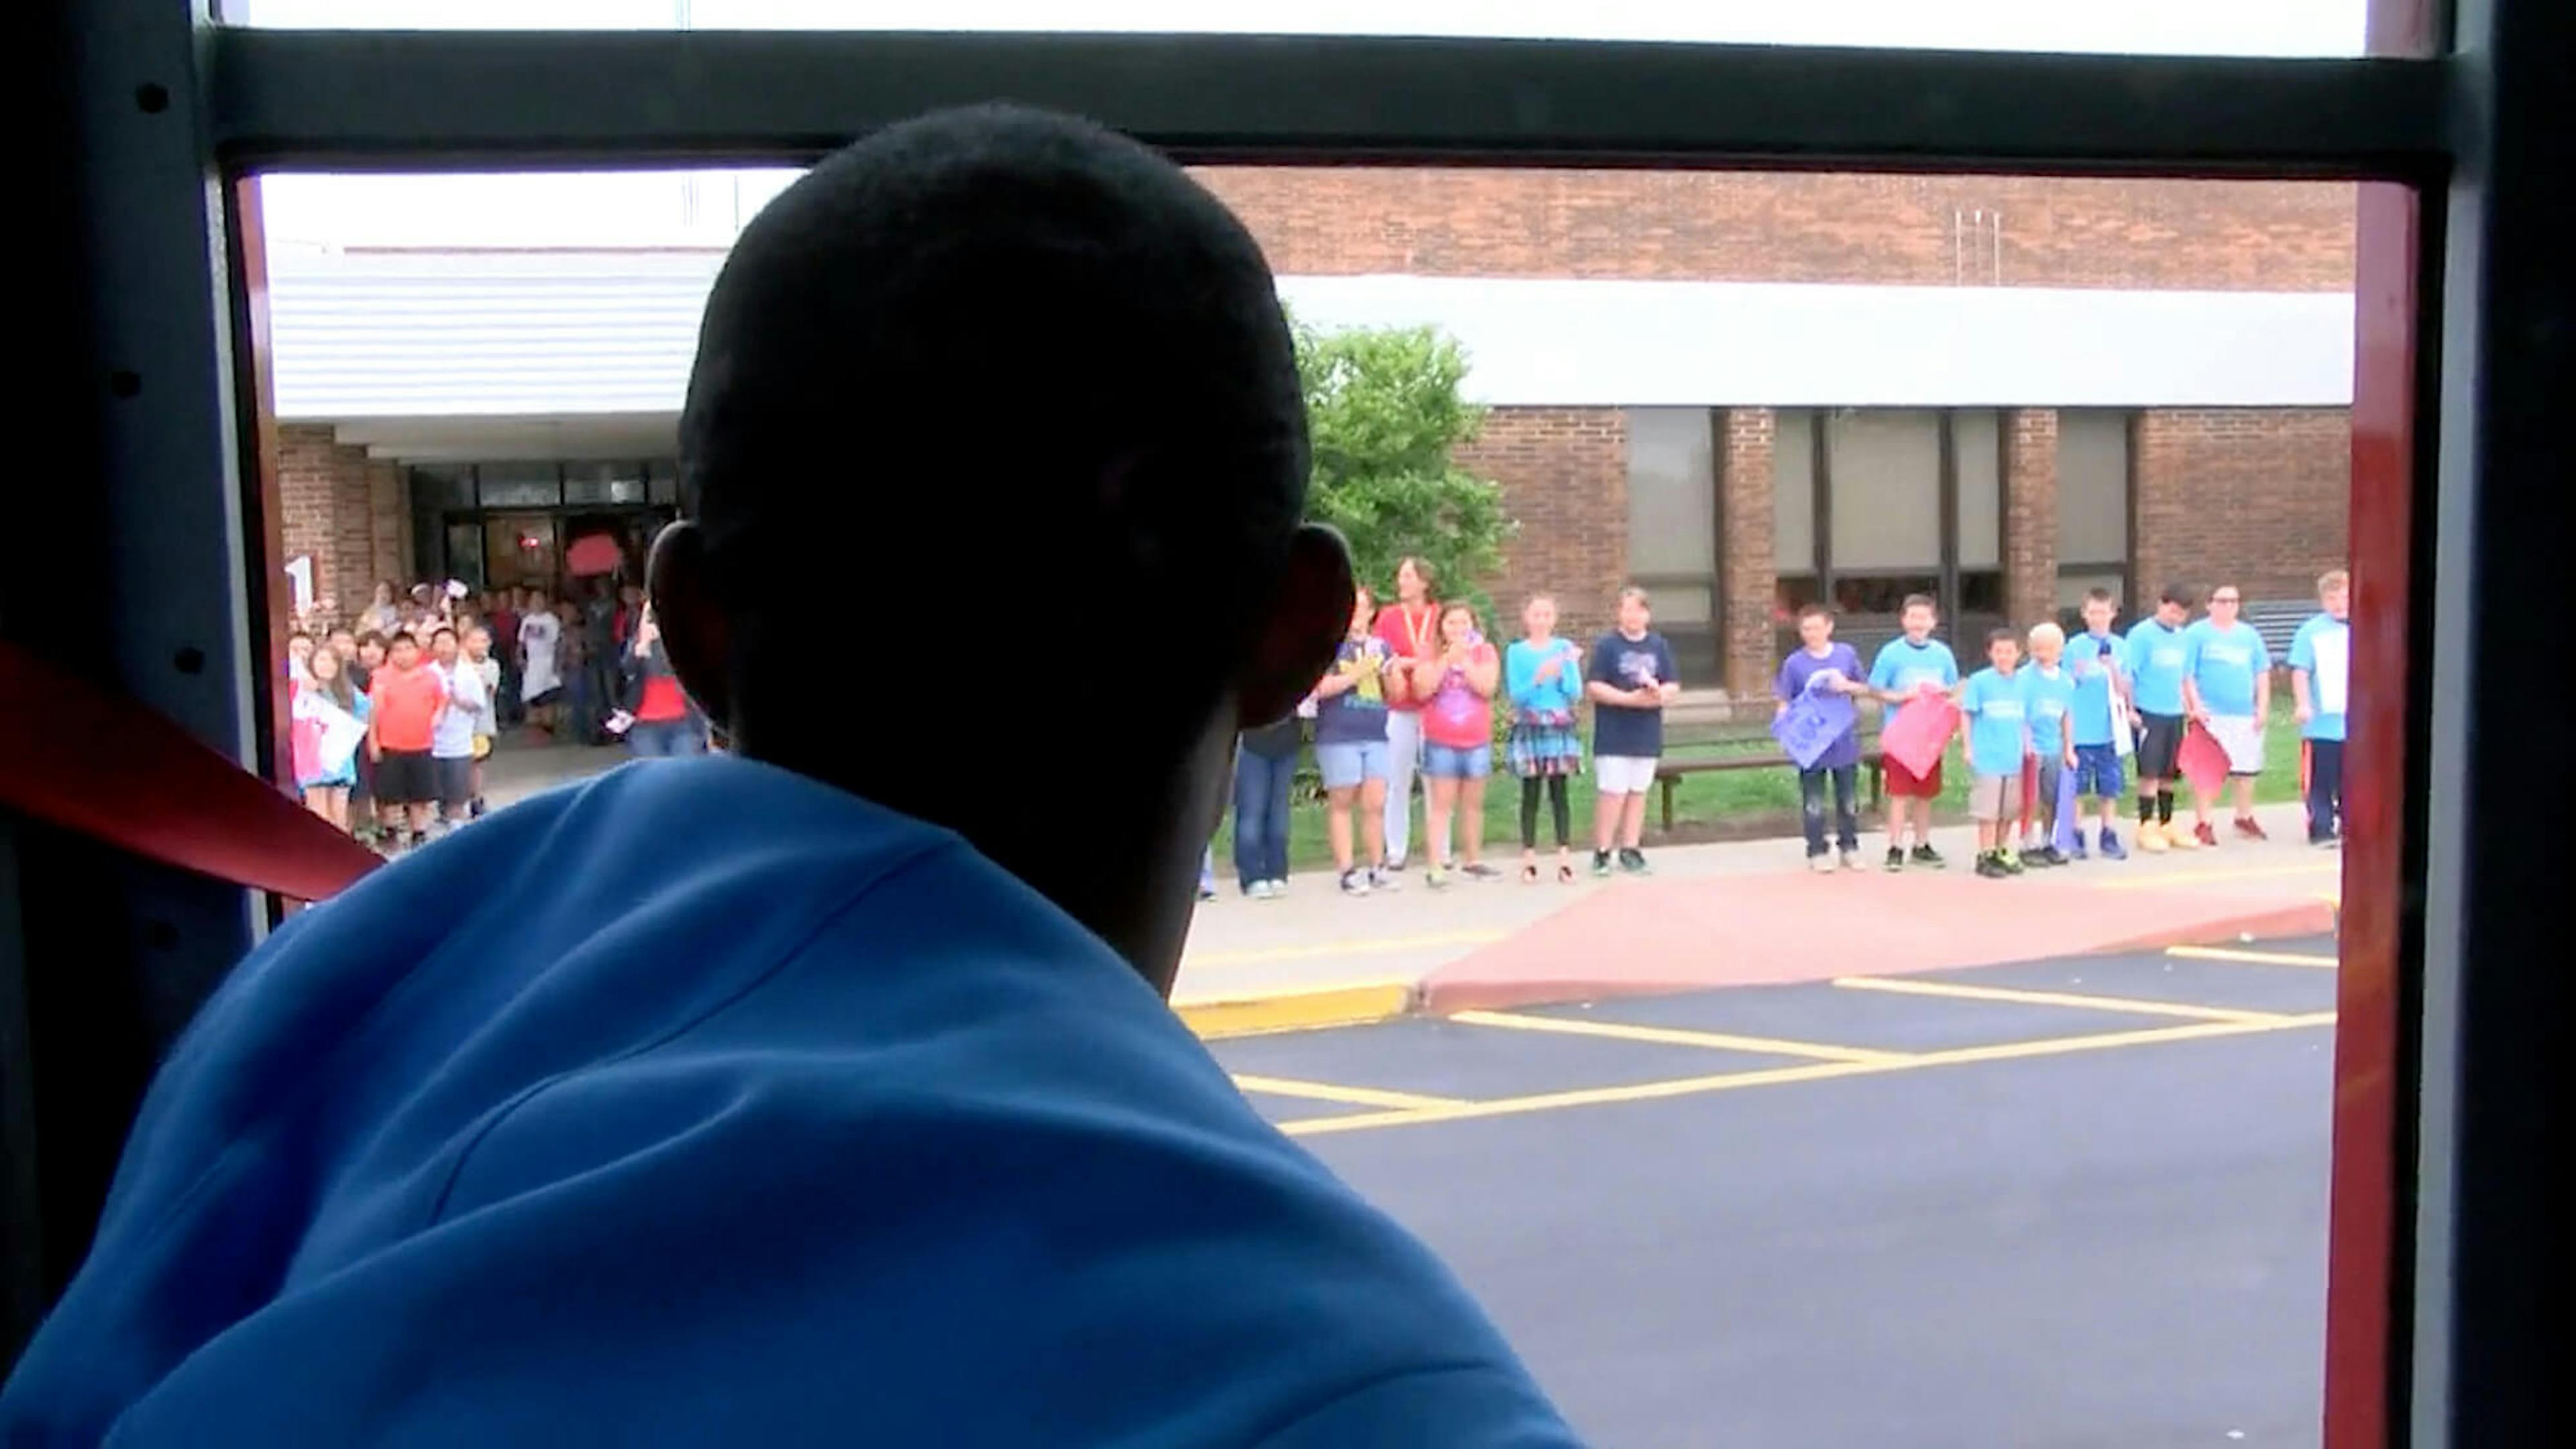 Lex Gillette arrives at a school while students wait to greet him